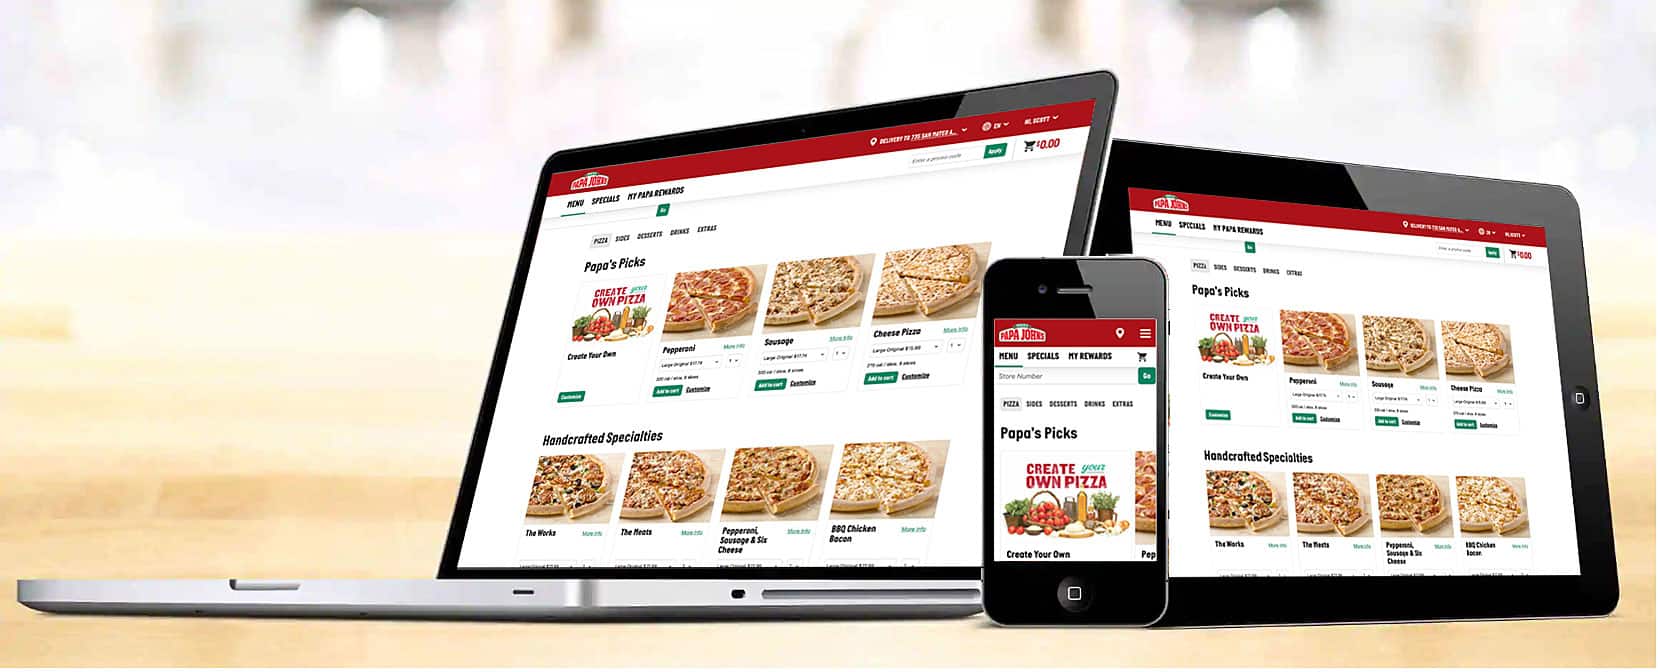 Home  Papas Pizza Cafe Online Ordering